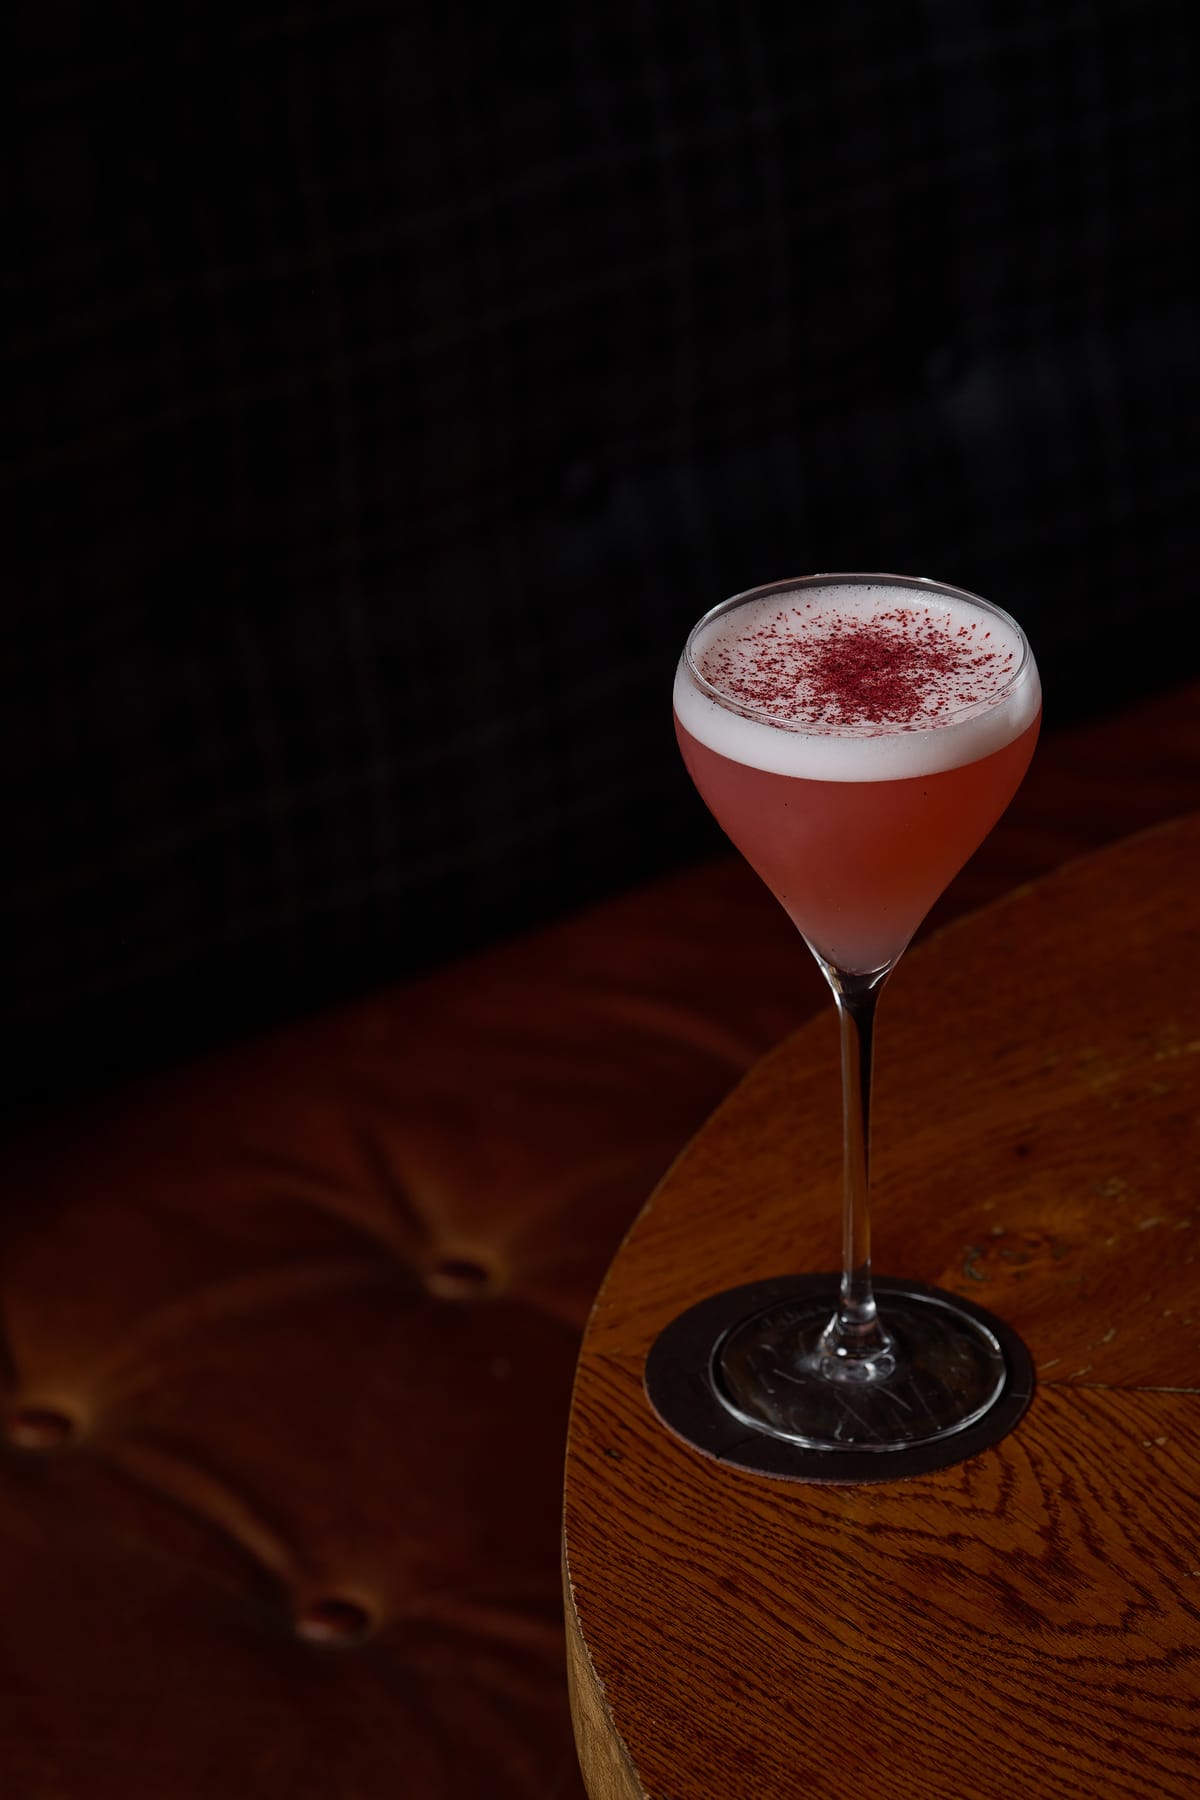 Get the recipe for Mademoiselle, from Melbourne's Beneath Driver Lane